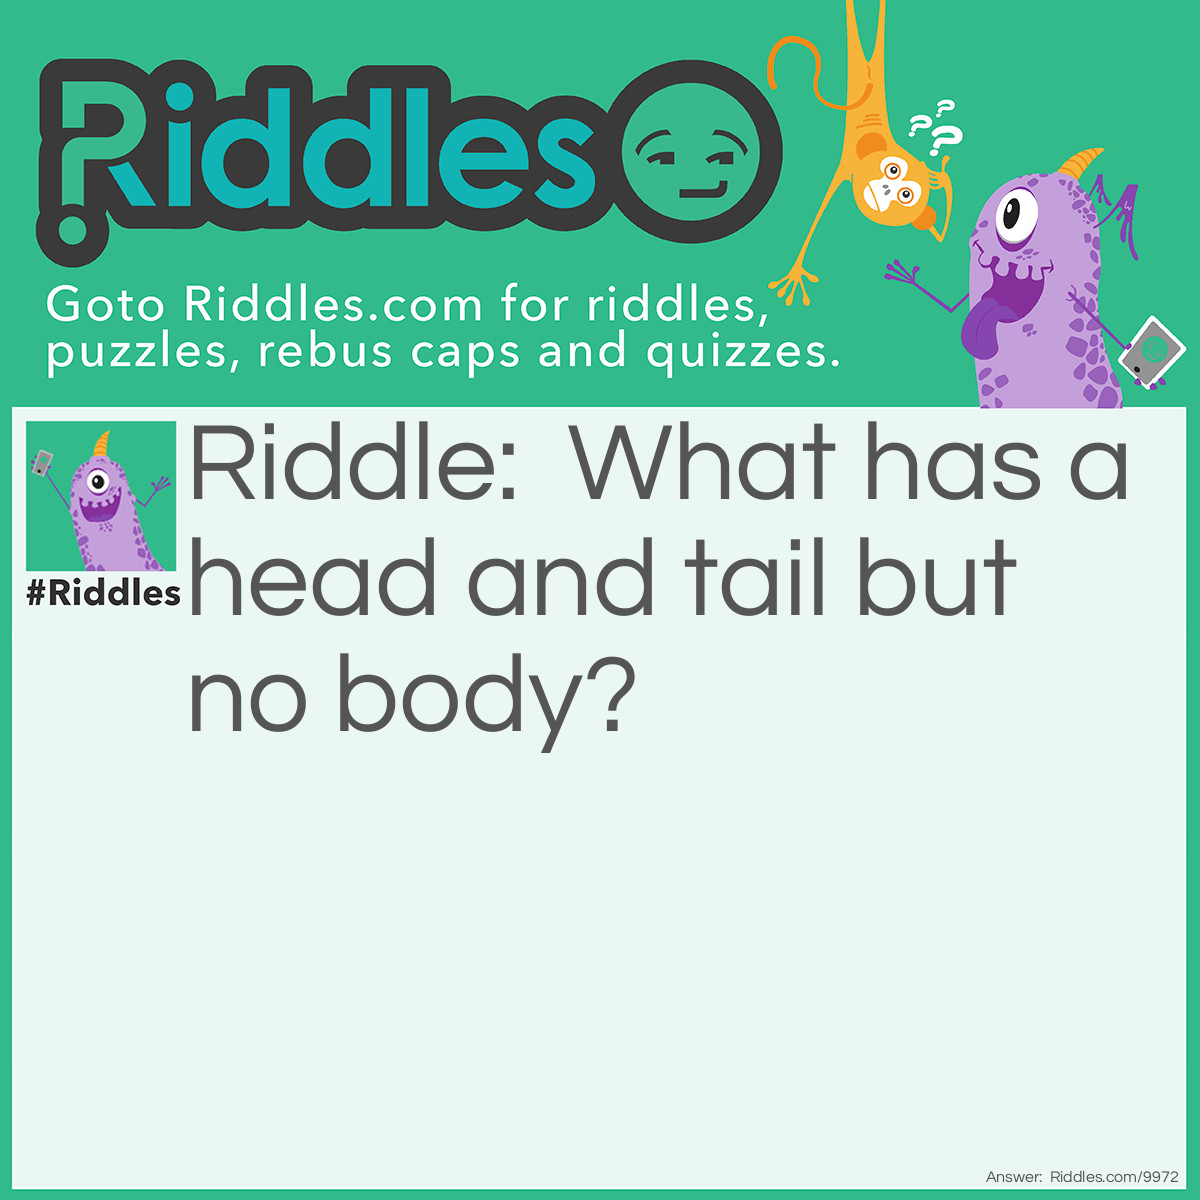 Riddle: What has a head and tail but no body? Answer: A coin Because people ask when they flip a coin head or tail so the coin has a tail and a head but no body.